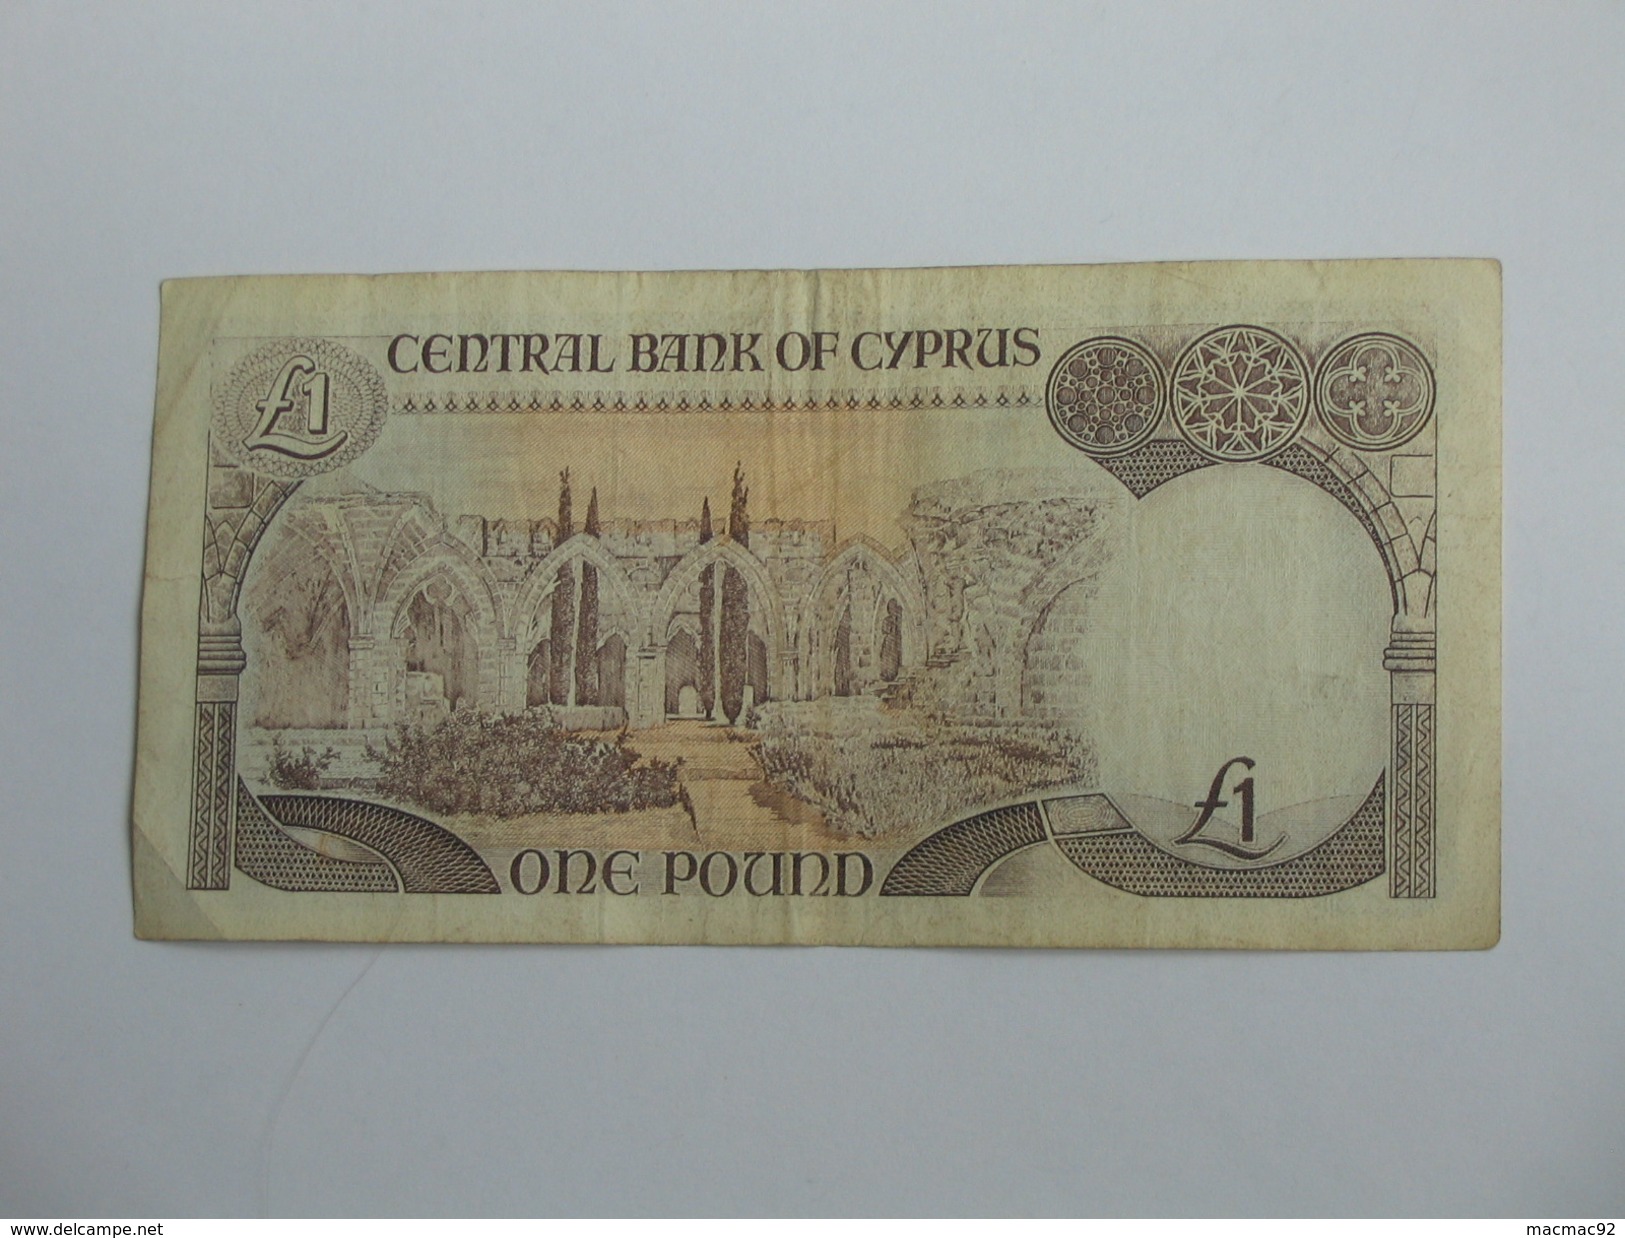 1 One Pound 1994 Central Bank Of Cyprus - CHYPRE **** ACHAT IMMEDIAT *** - Chipre